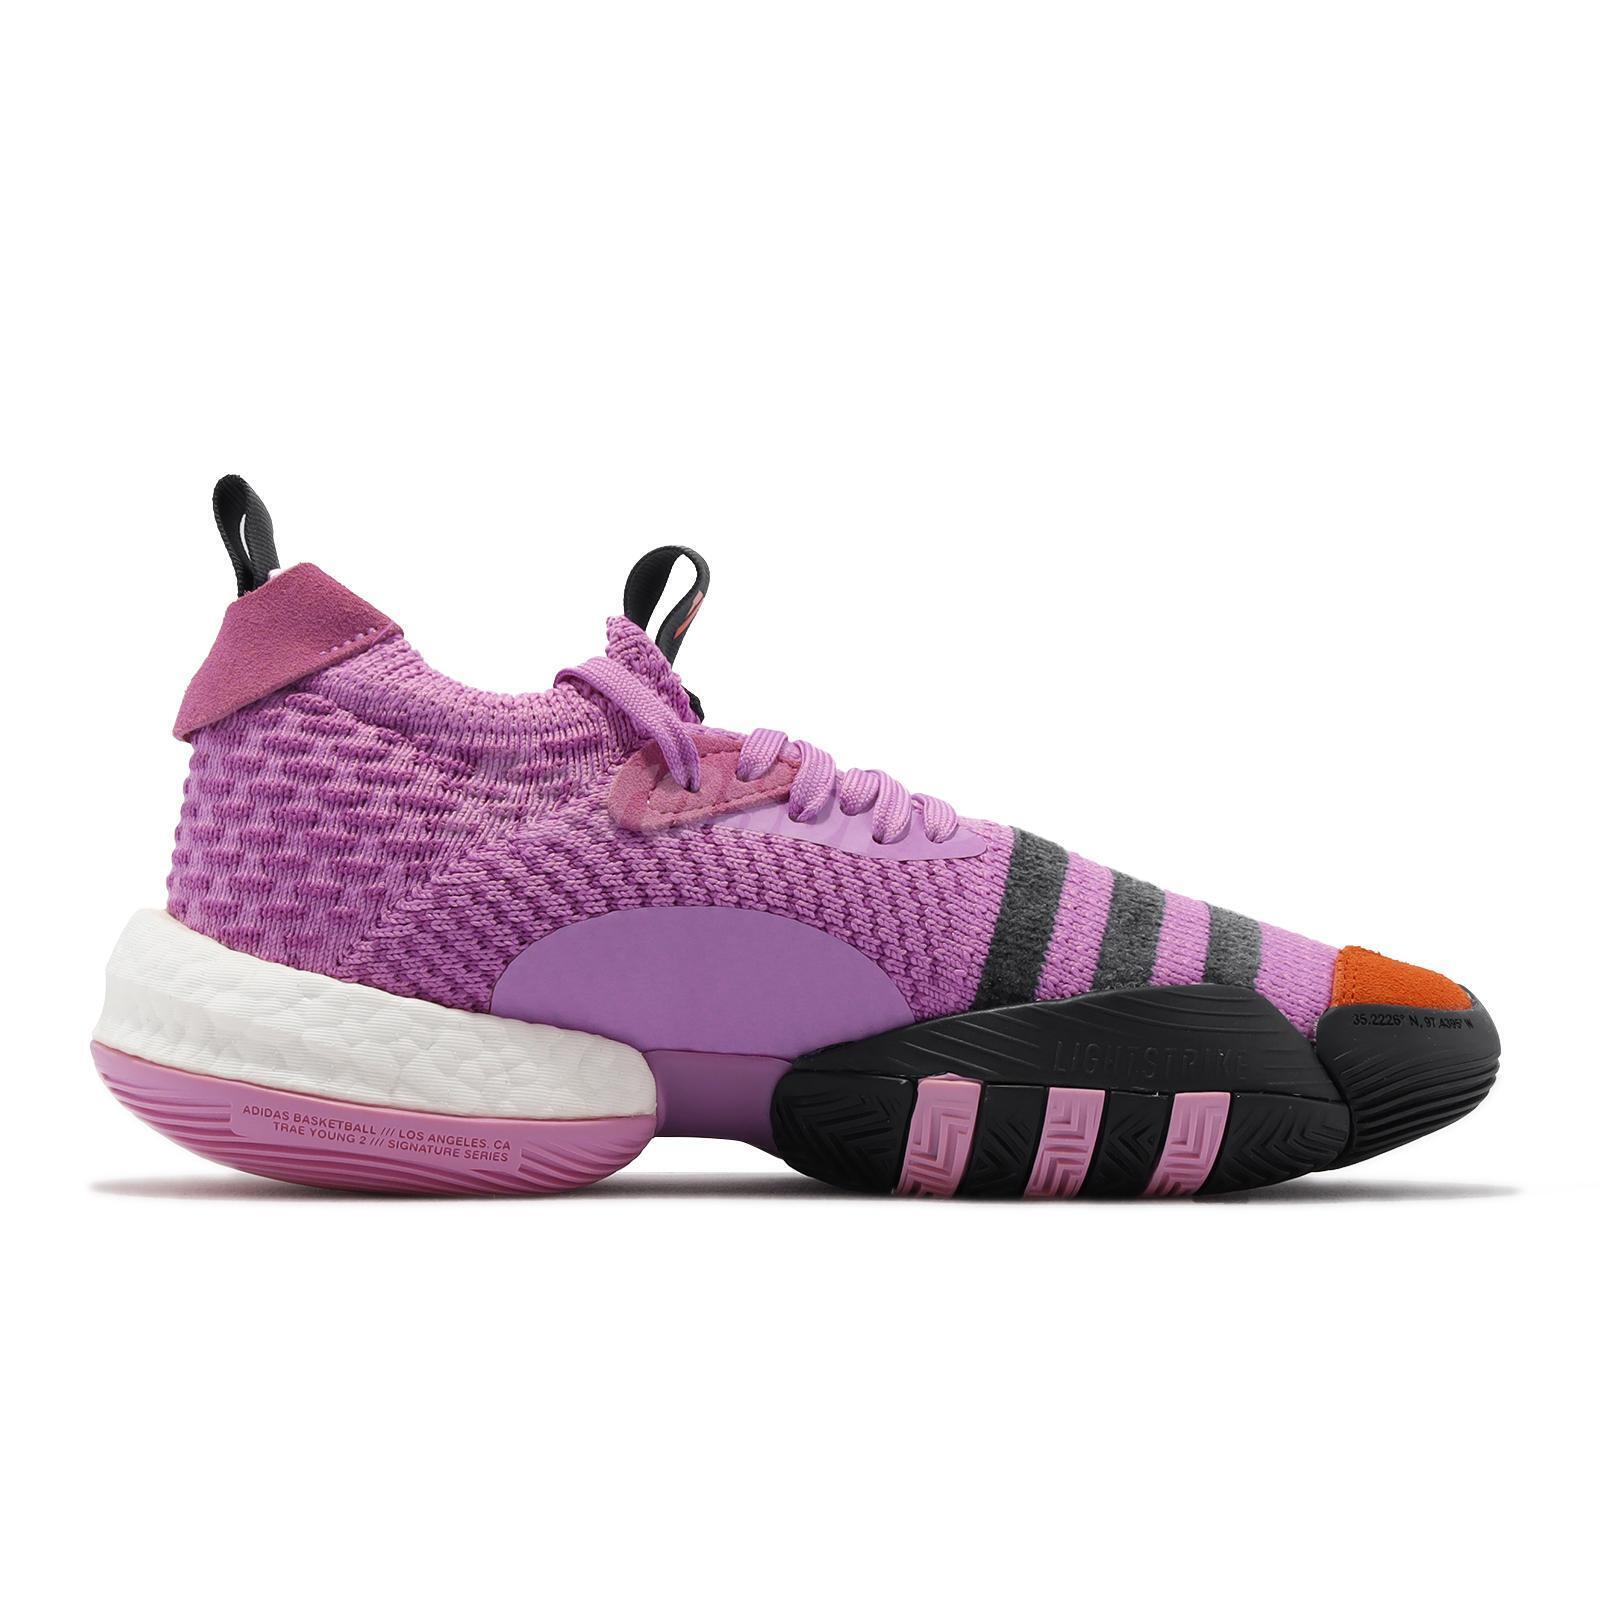 adidas Trae Young 2 “Stratosphere” H06483